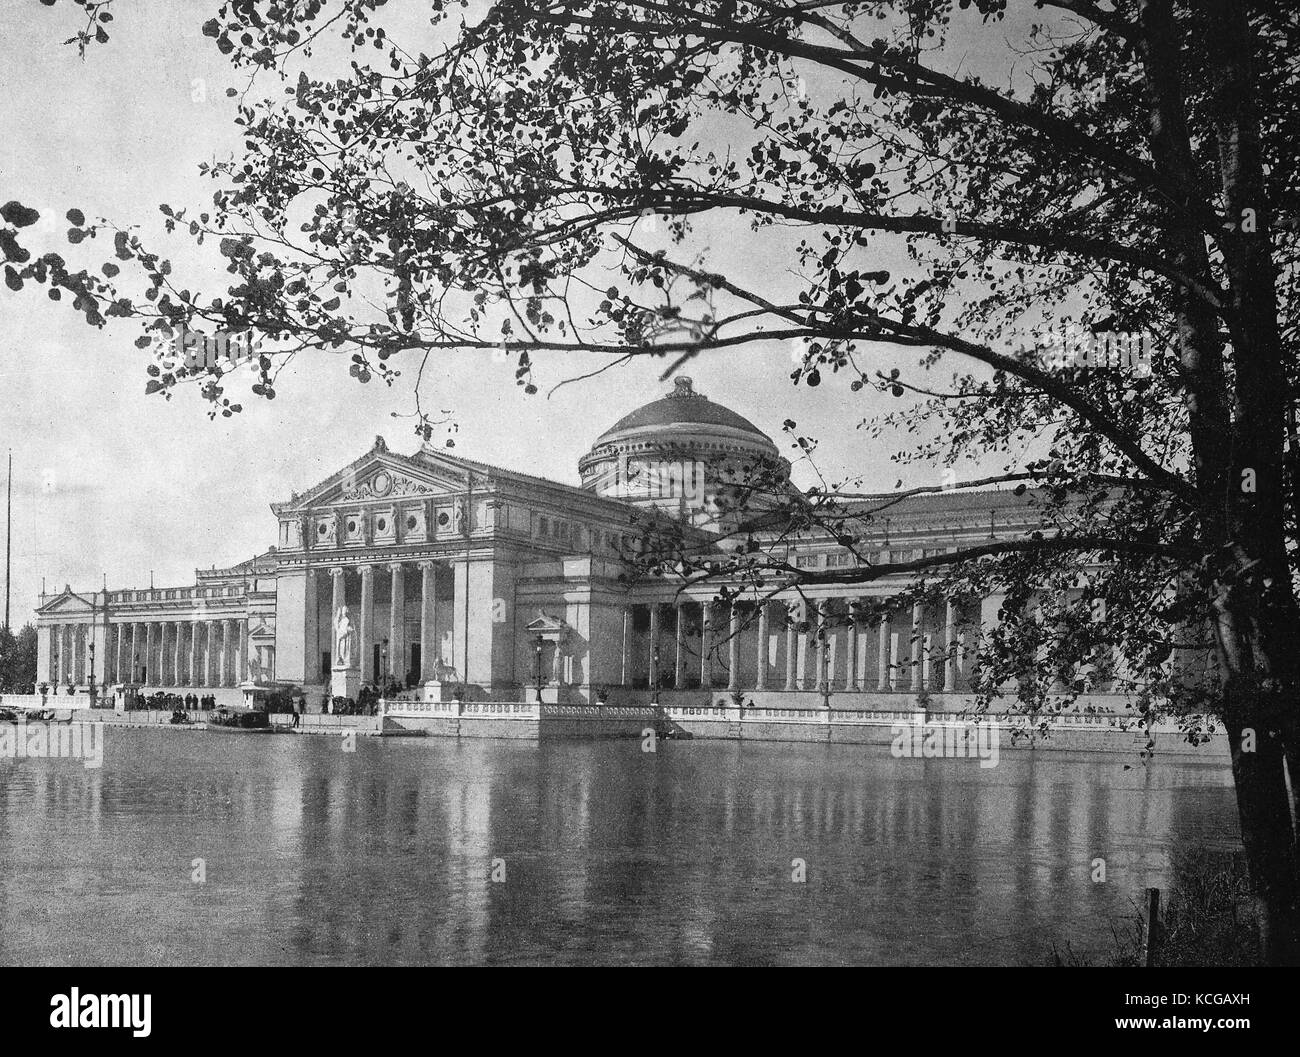 United States of America, Illinois State, Chicago city, building at the territory of the World Exposition 1893, the art palace, jewel of the exhibition, digital improved reproduction of a historical photo from the (estimated) year 1899 Stock Photo